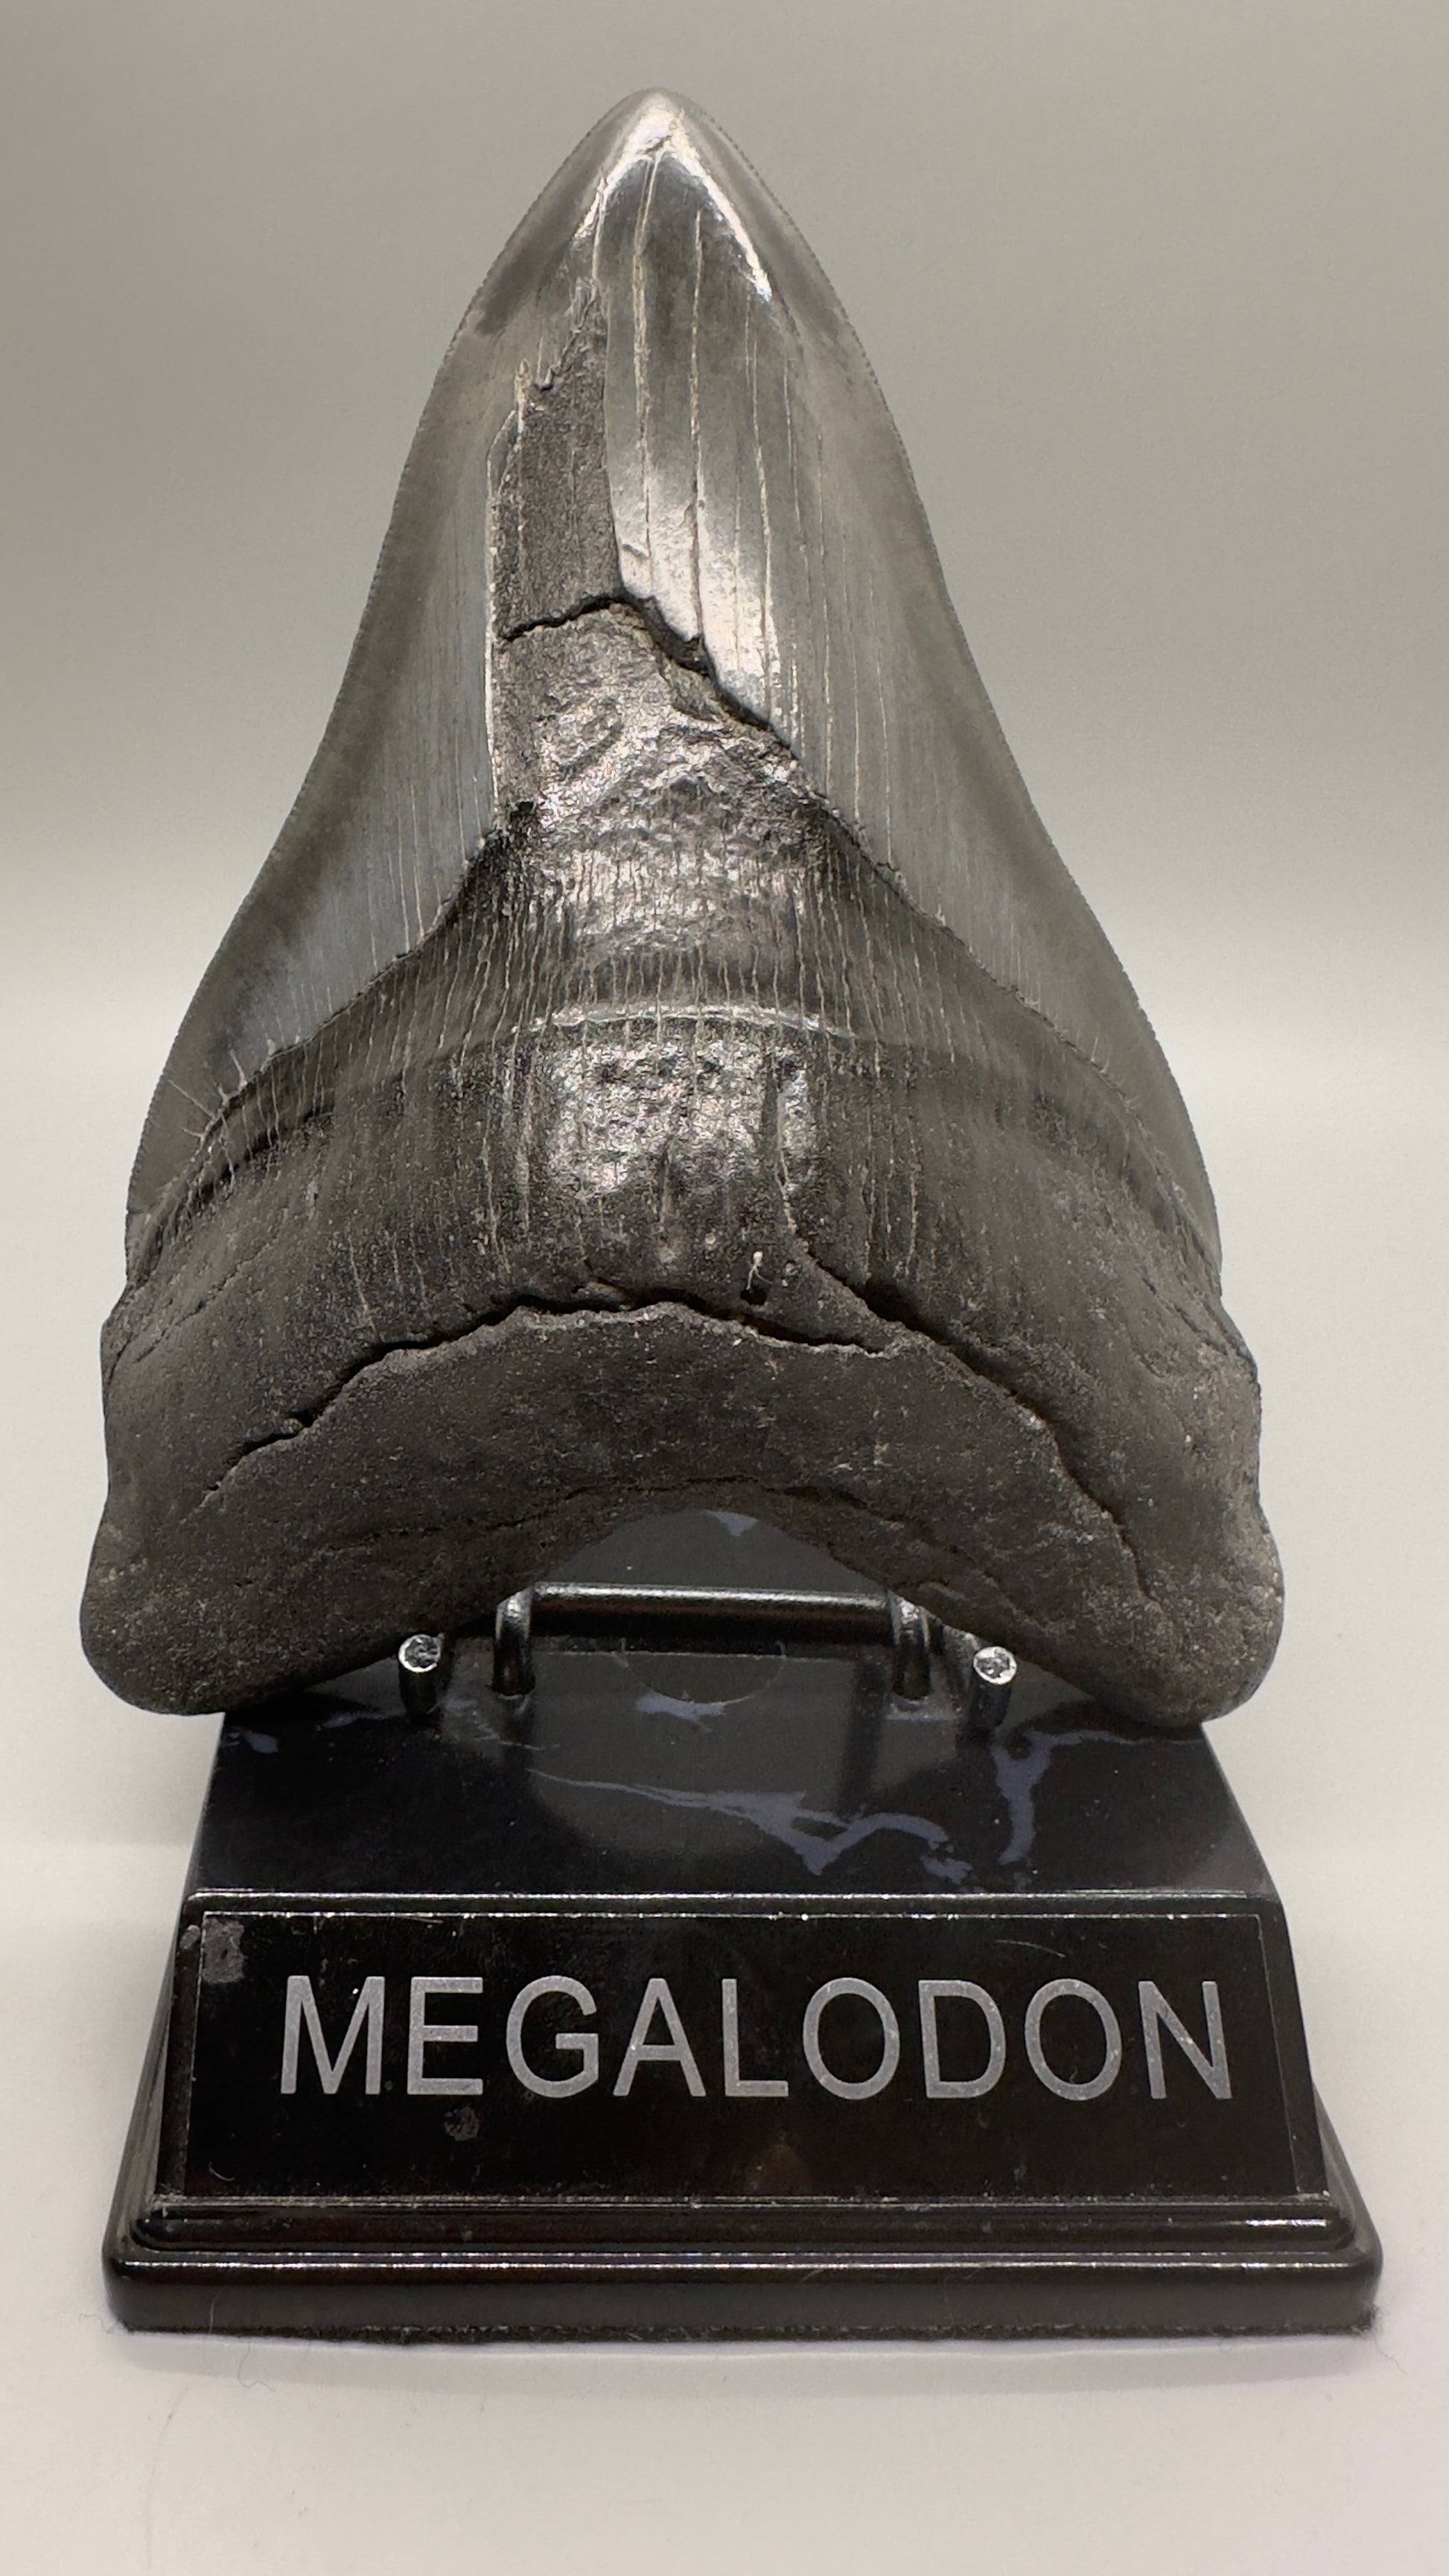 EXTRA LARGE 6.04" Fossil Megalodon Tooth: Scuba Diving, USA CM4633 - Front in stand